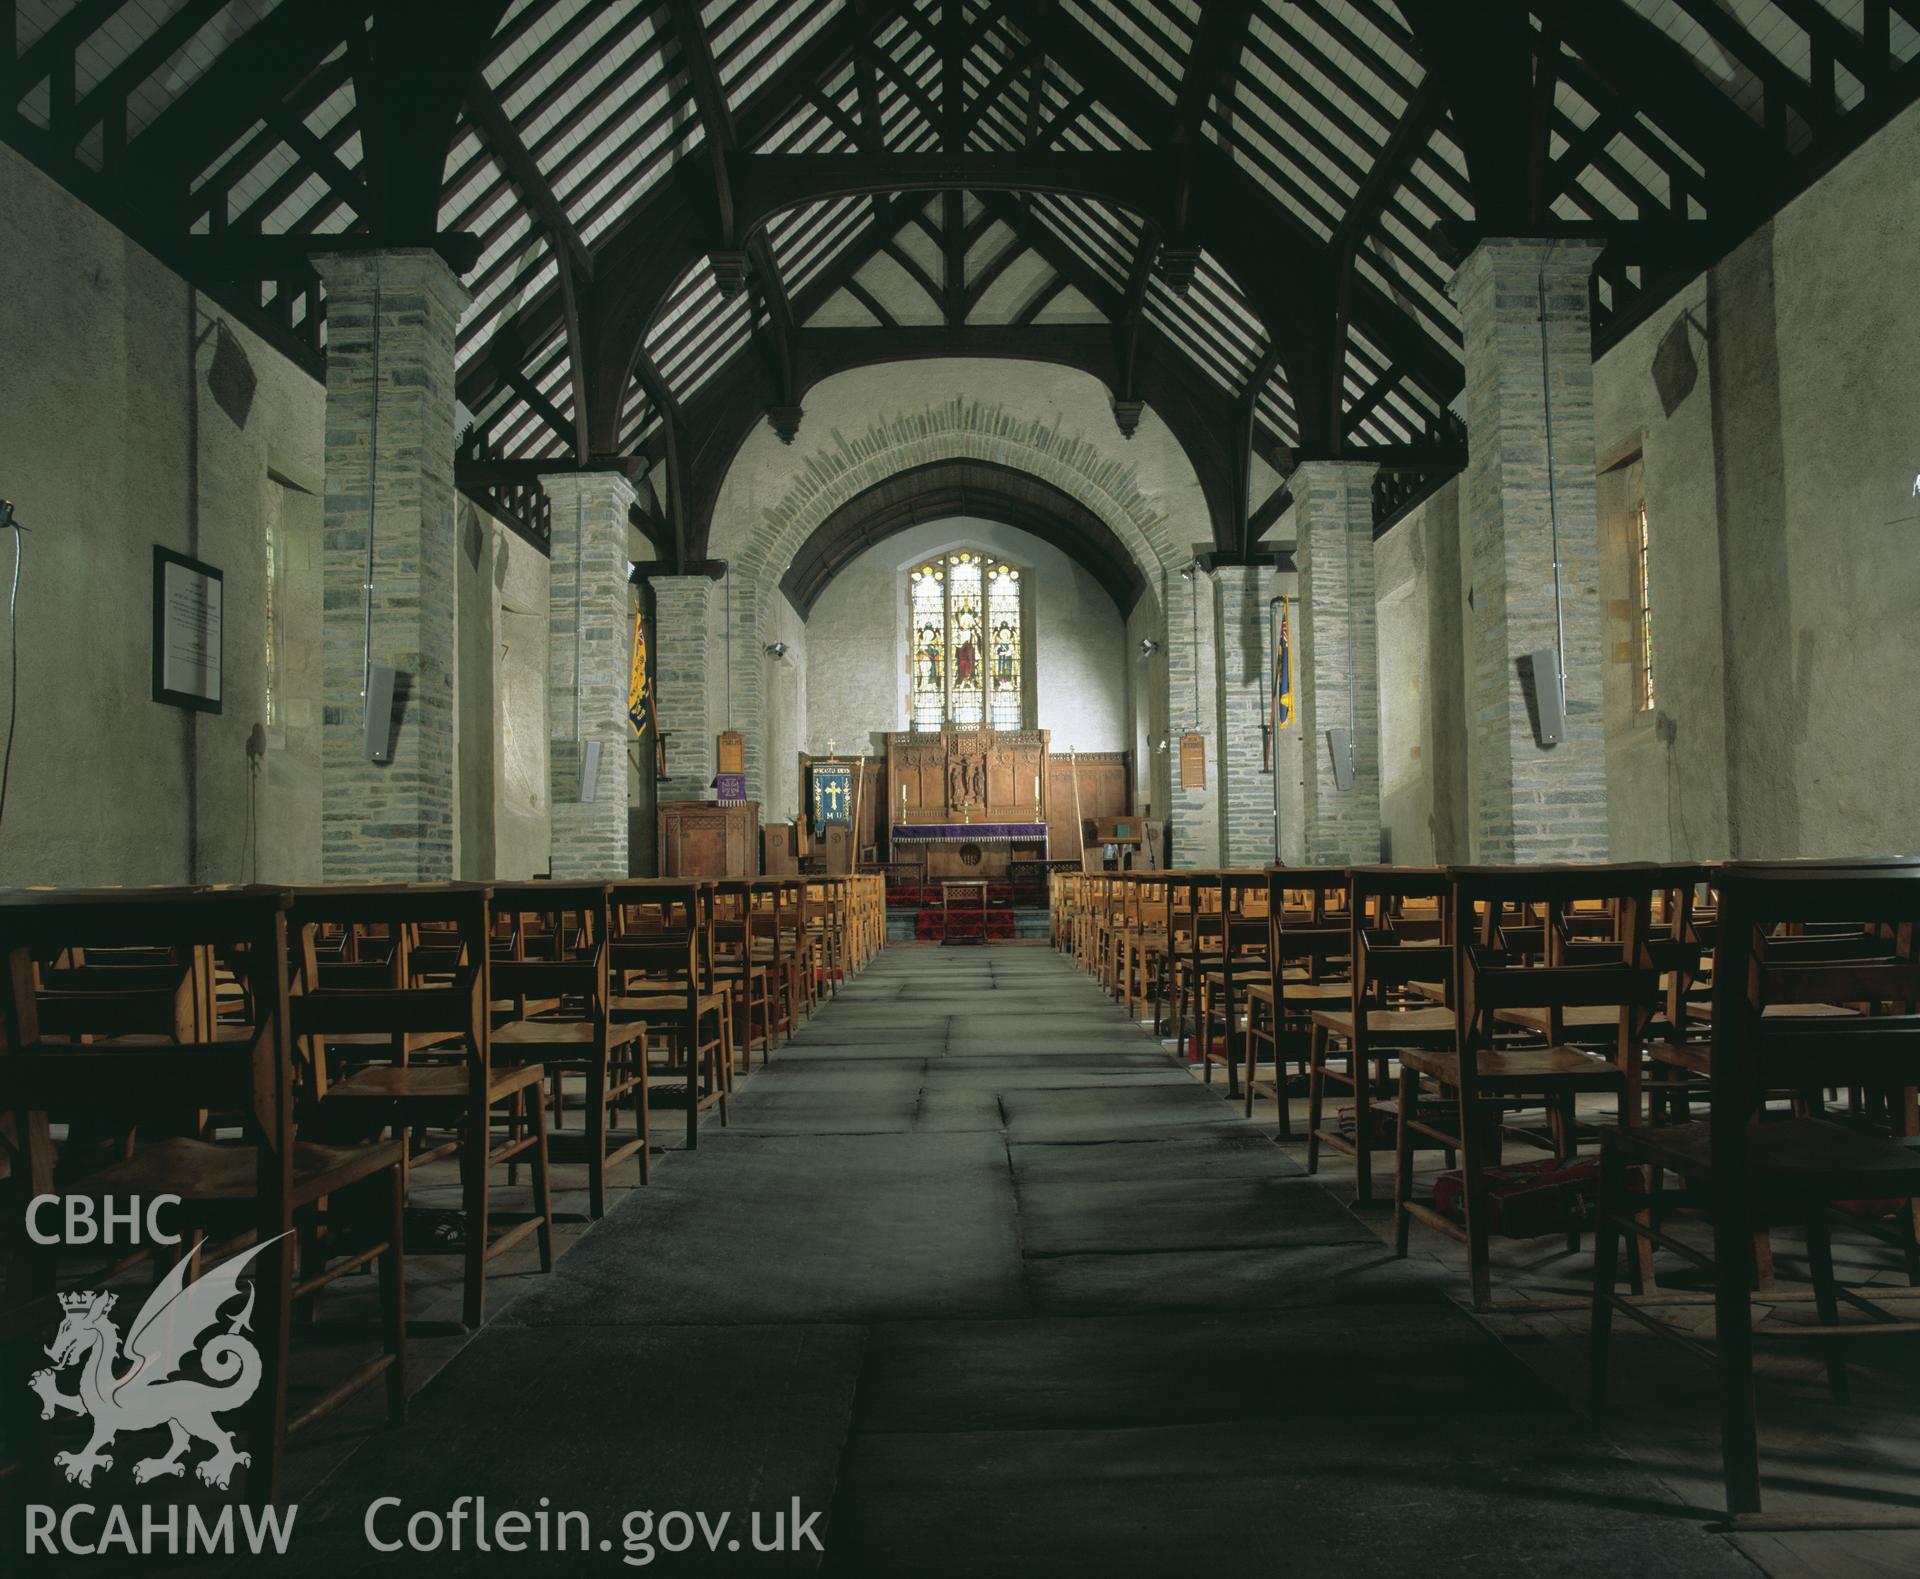 Colour transparency showing interior view of Holy Trinity Church, Newcastle Emlyn taken by Iain Wright, June 2004